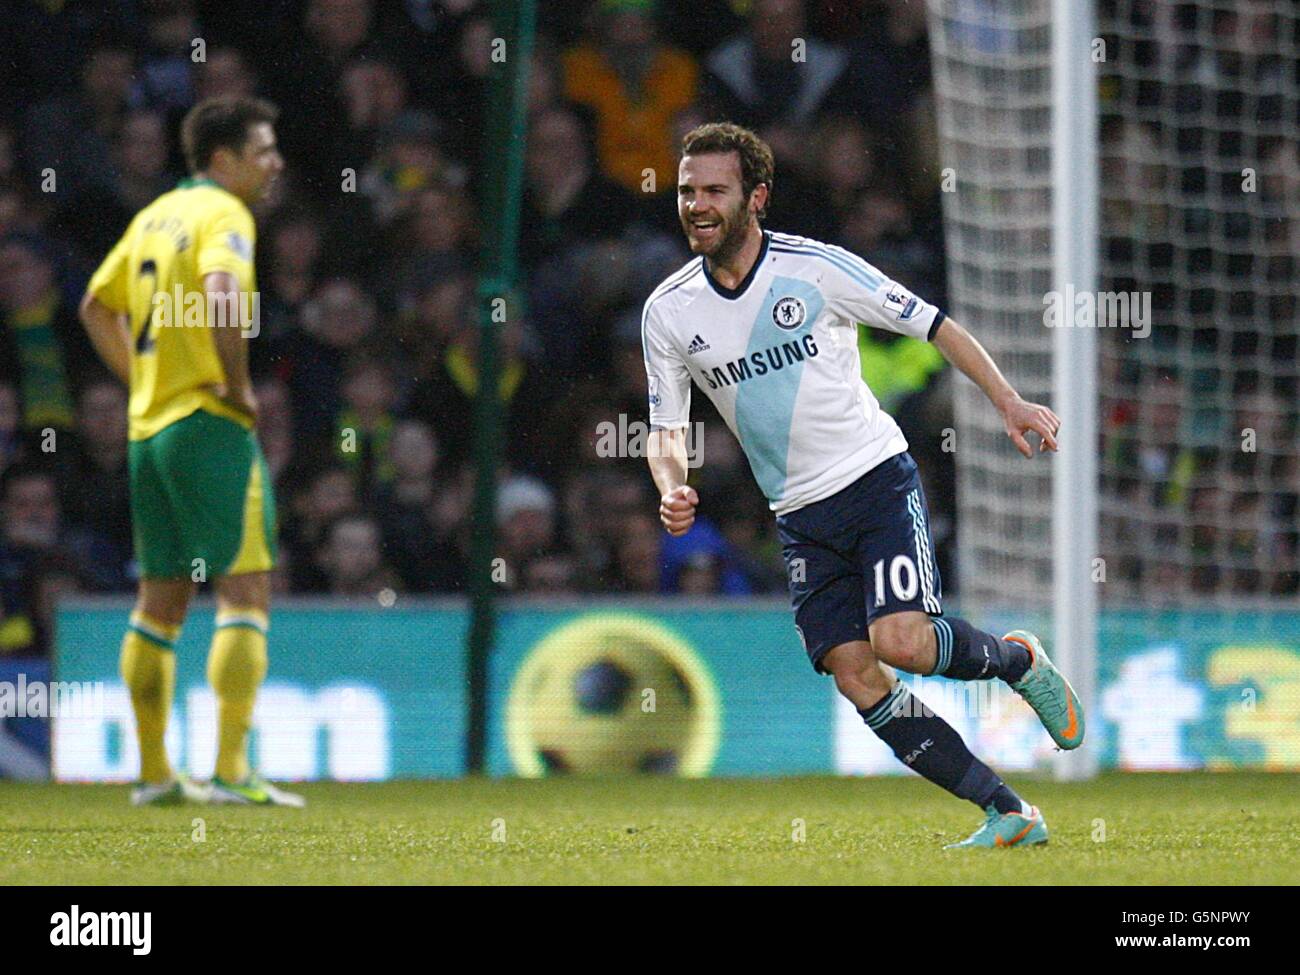 Soccer - Barclays Premier League - Norwich City v Chelsea - Carrow Road. Chelsea's Juan Mata (right) celebrates scoring his teams first goal of the game as Norwich City's Russell Martin (left) looks on dejected Stock Photo